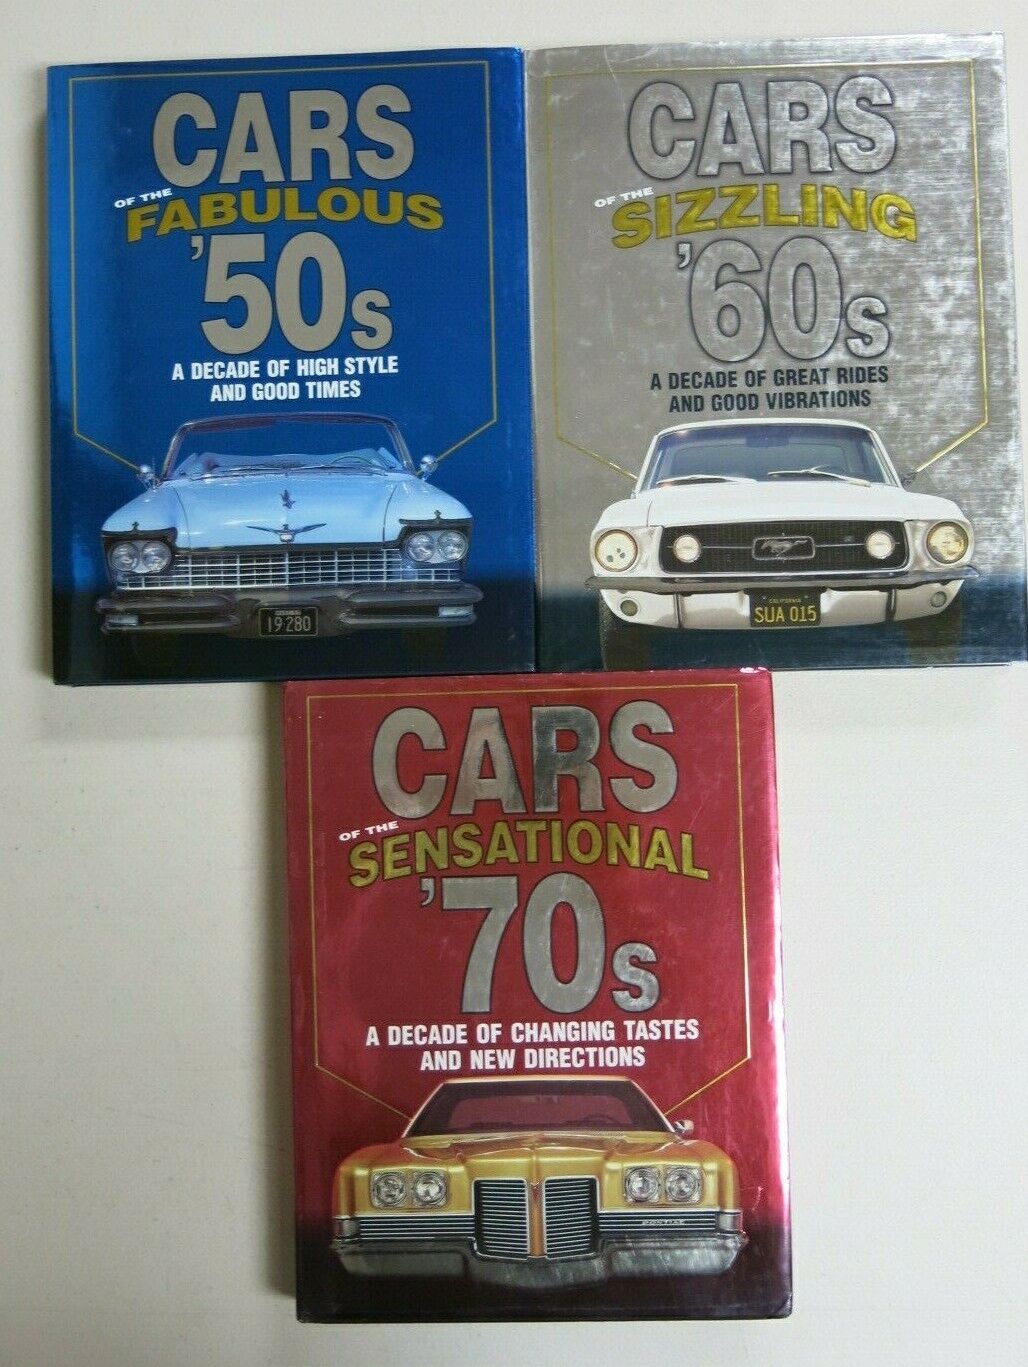 Cars of the Fabulous' 50s, the Sizzling '60s, the Sensational' 70s (0785362363)